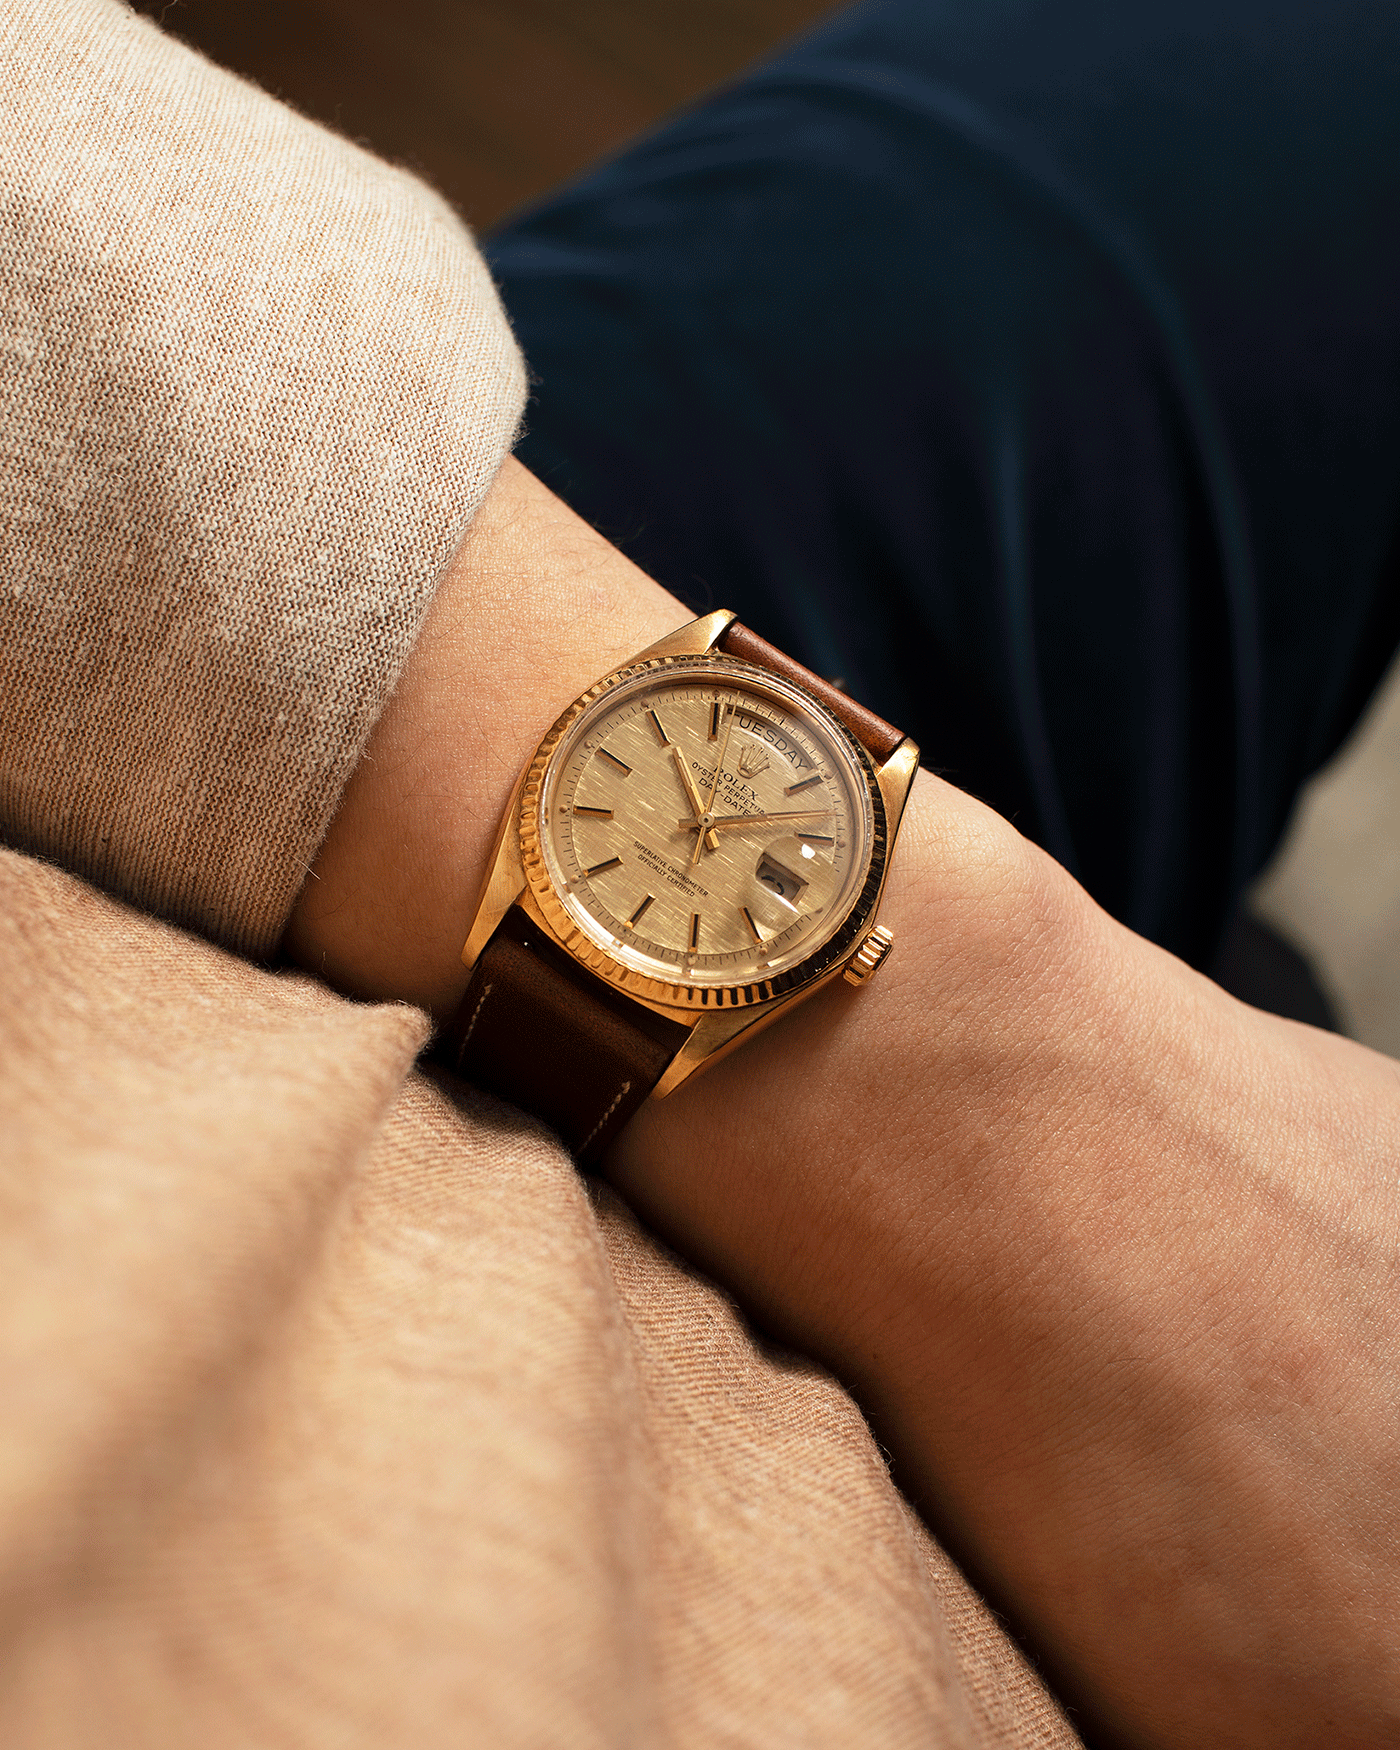 Brand: Rolex Year: 1978 Model: Day Date Reference Number: 1803 Serial Number: 5089385 Material: 18k Yellow Gold Movement: Cal. 1555 Case Diameter: 36mm Lug Width: 20mm Bracelet/Strap: Nostime Tobacco Brown Horween Shell Cordovan